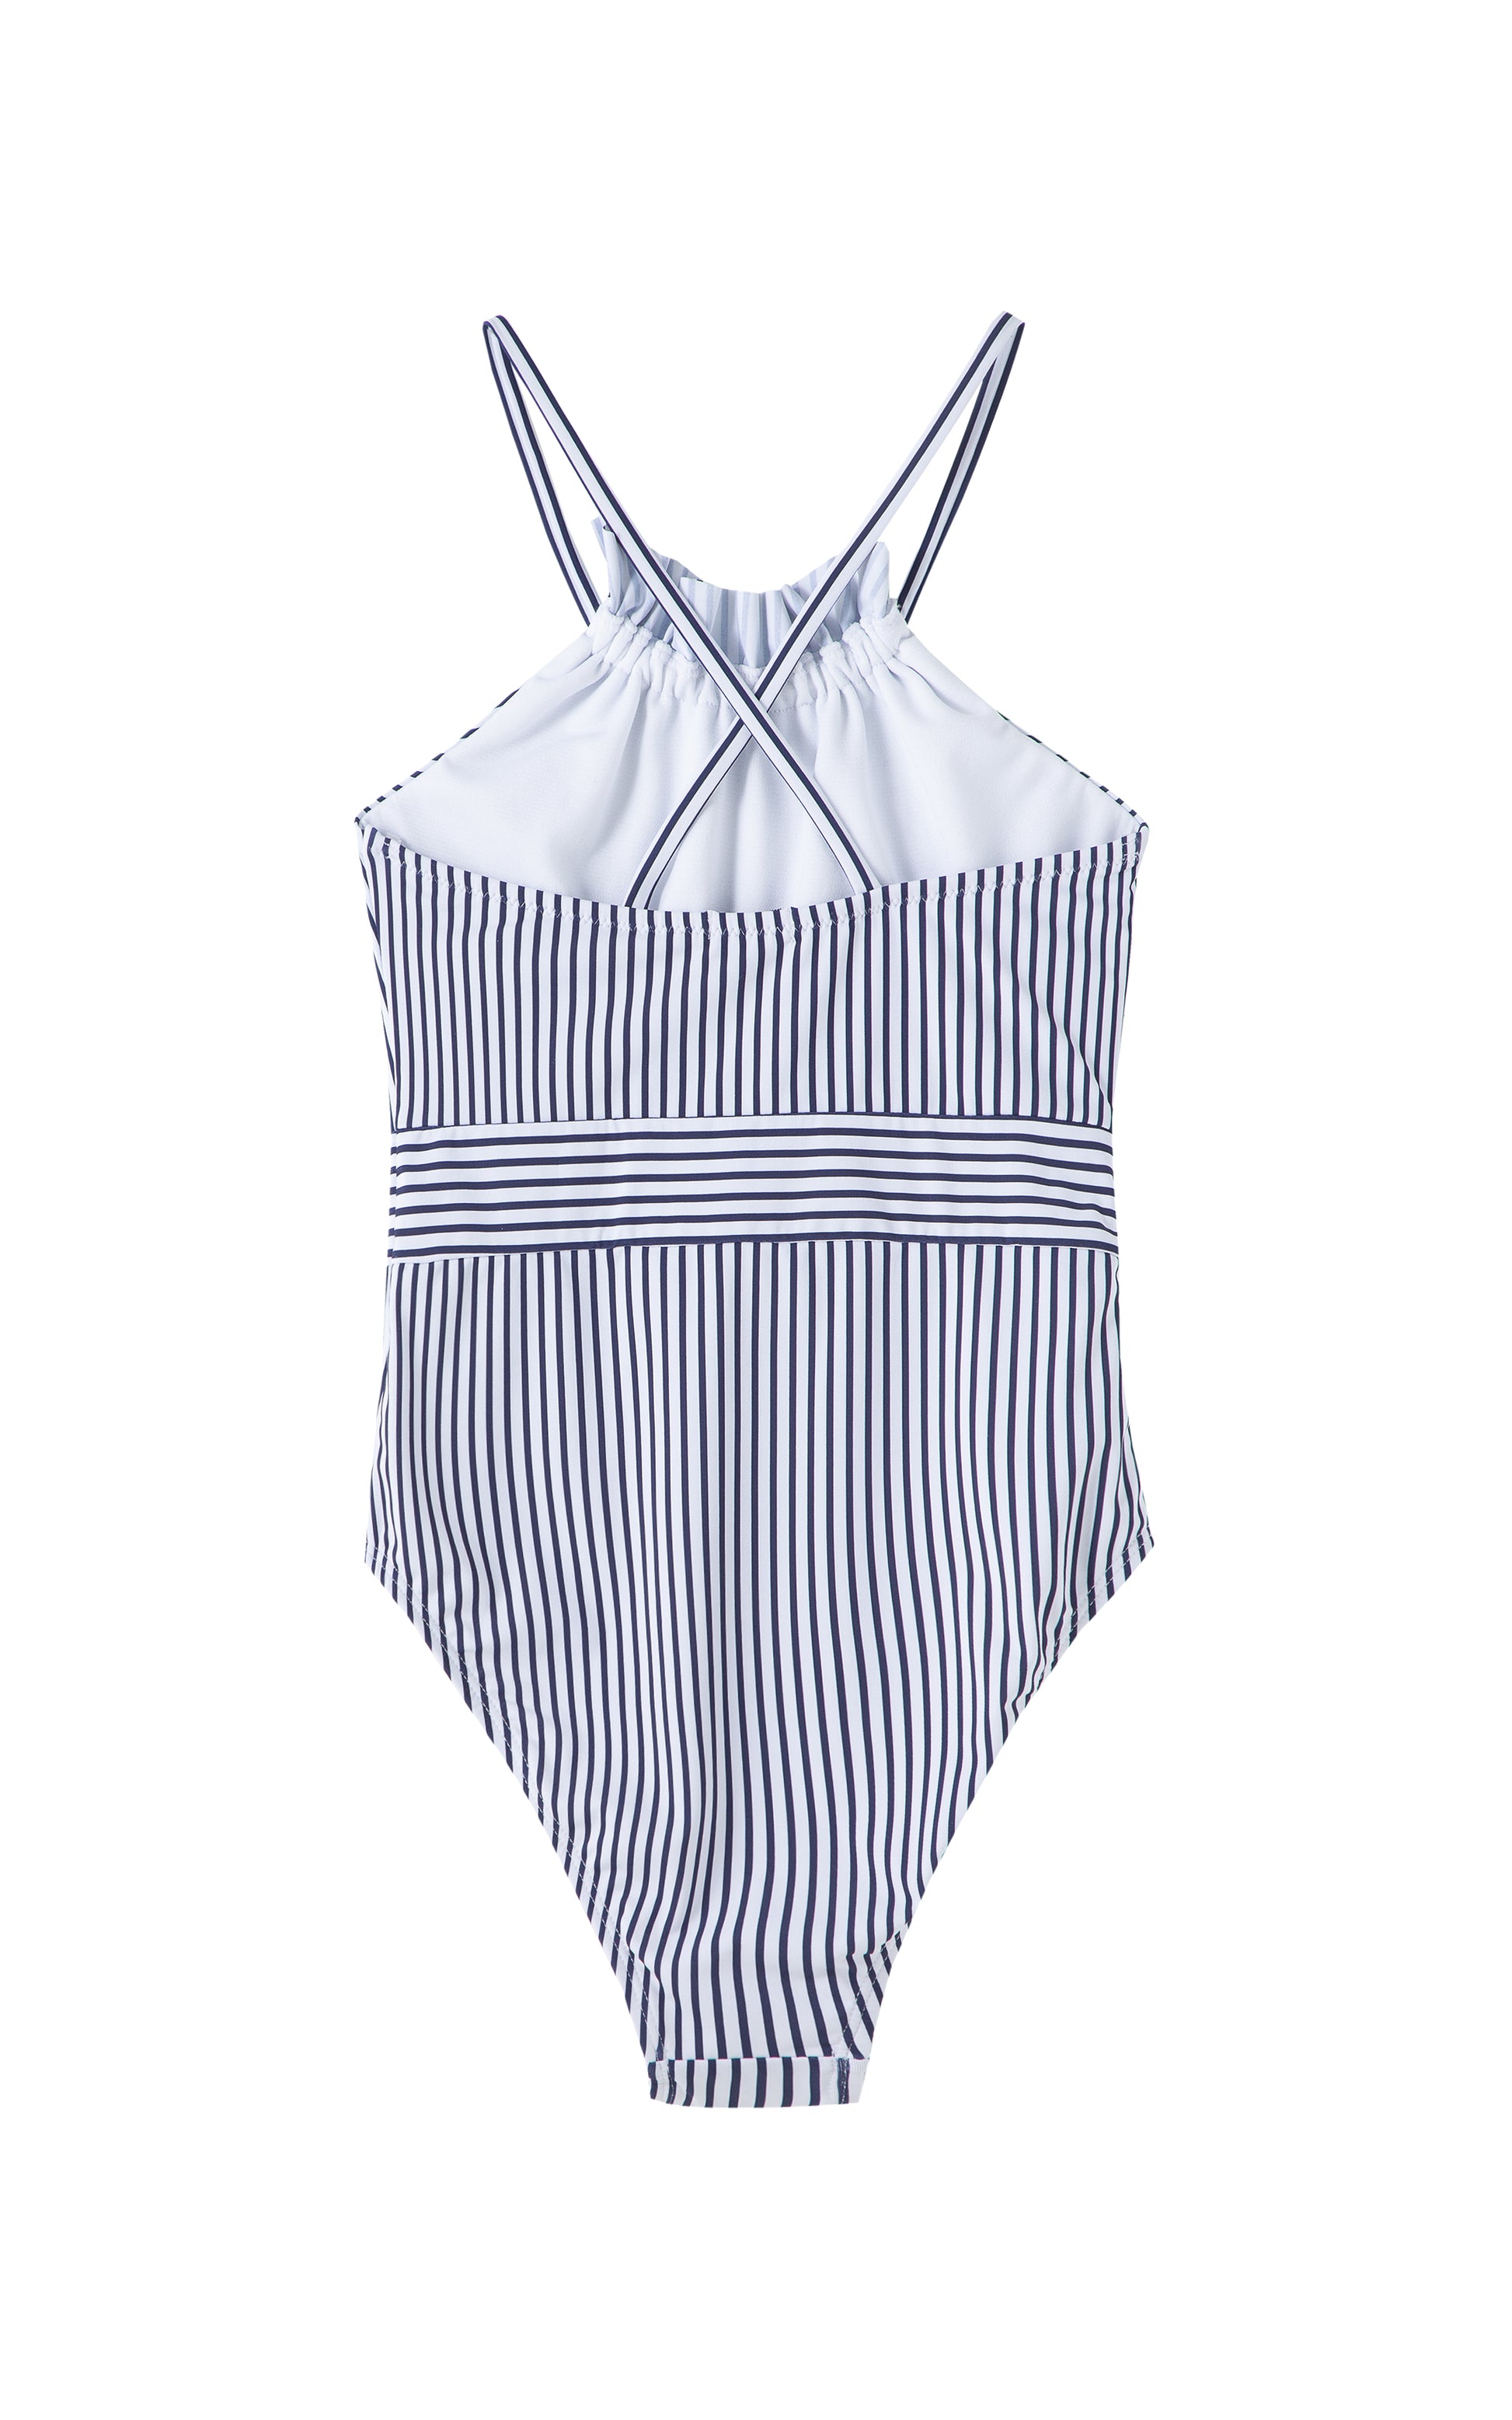 Back view of white and blue-striped swimsuit with tie at waist.